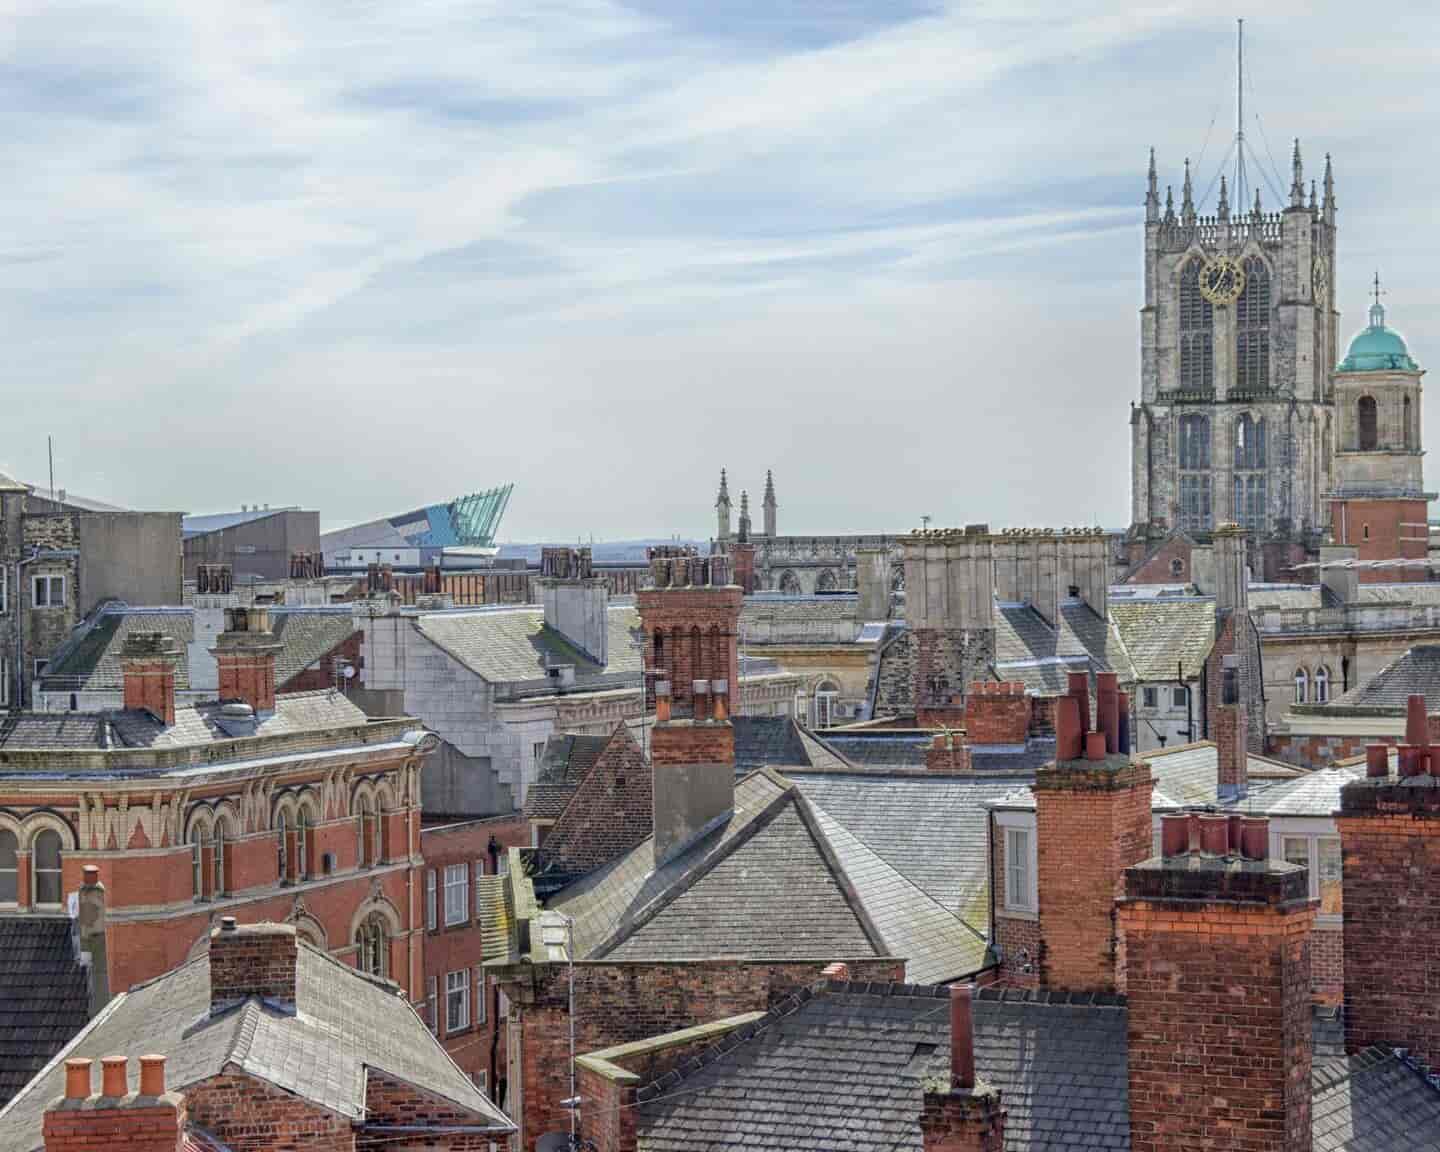 Student Accommodation in Hull - Rooftops and Hull Minster